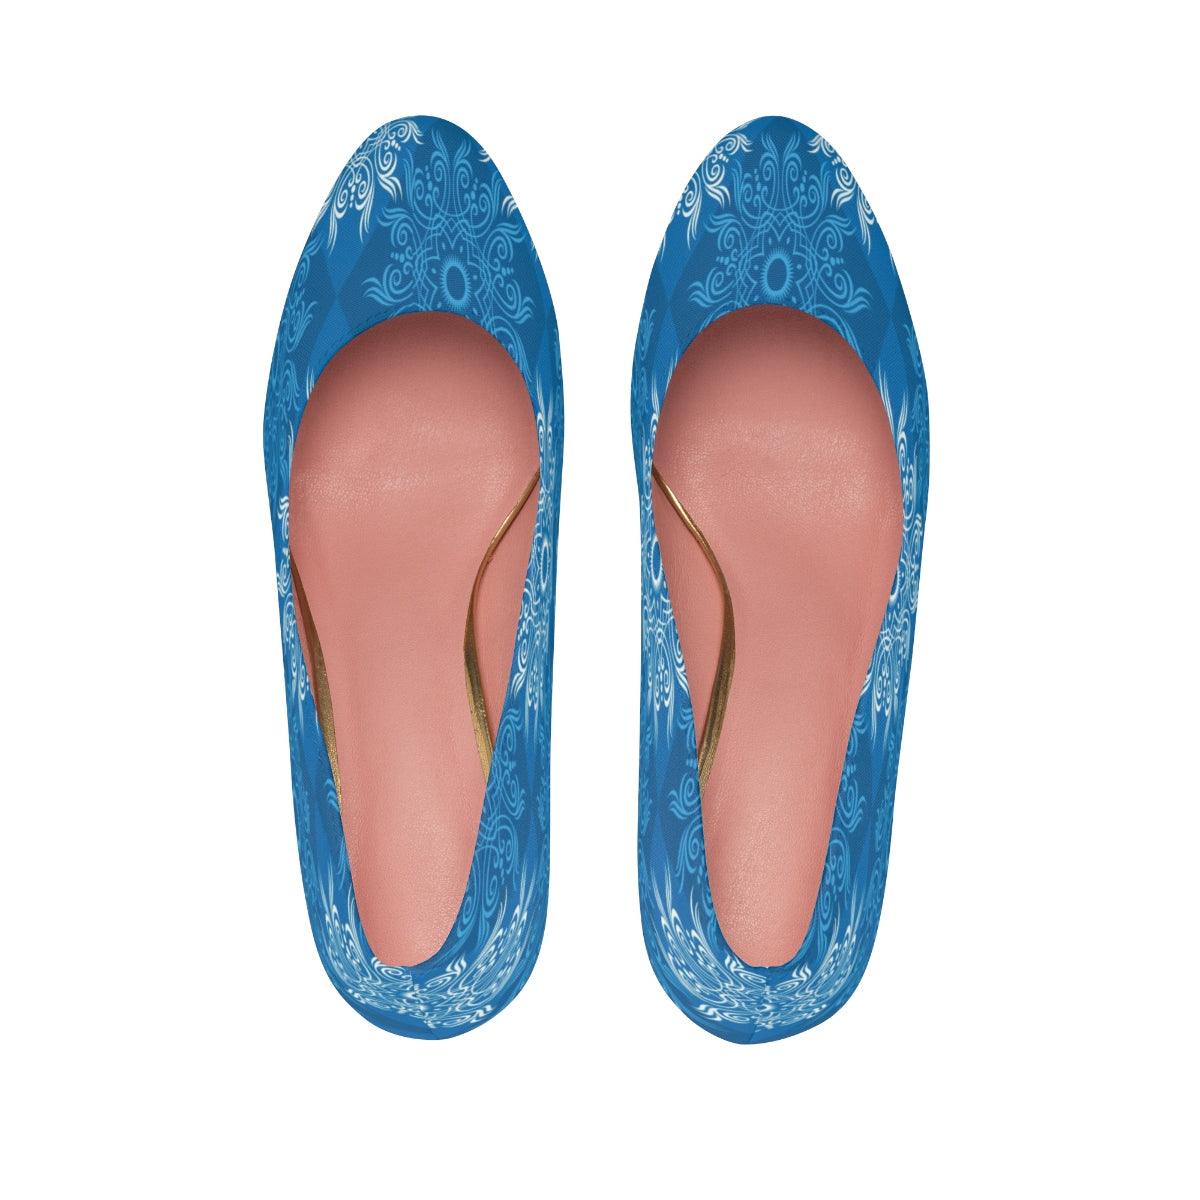 Blue Snow Women's High Heels - Buyashoes